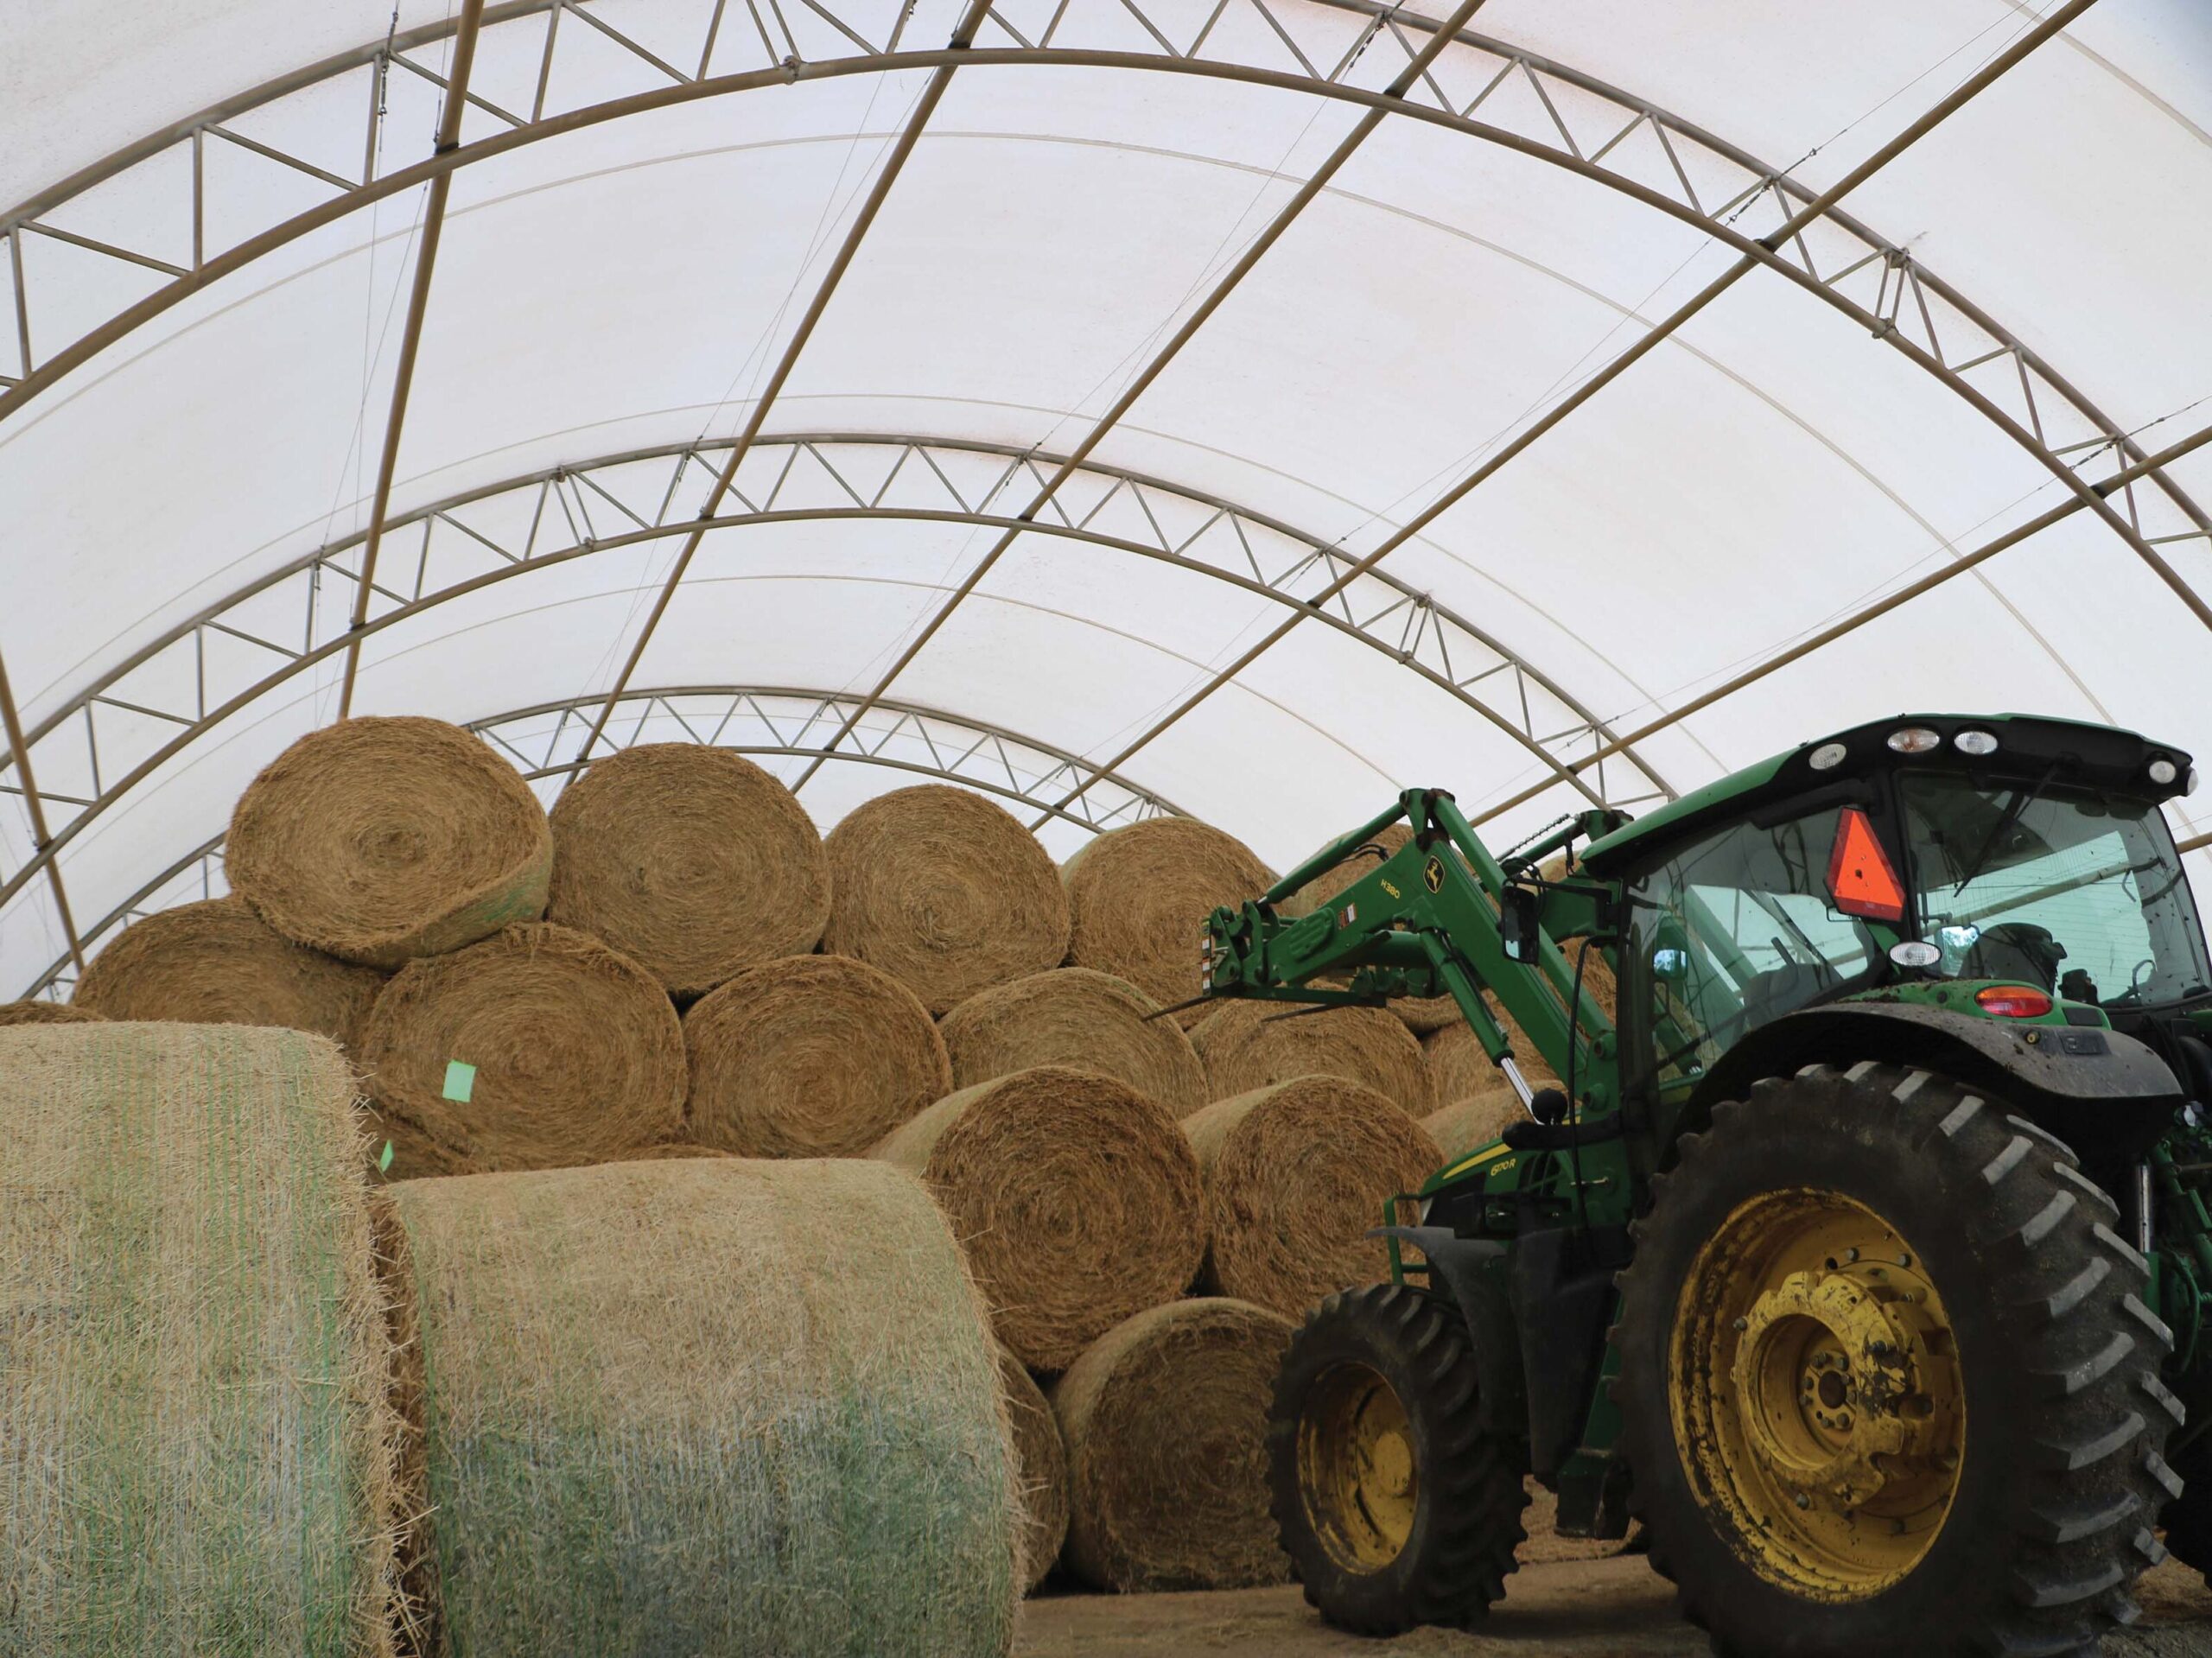 Hay storage with green tractor